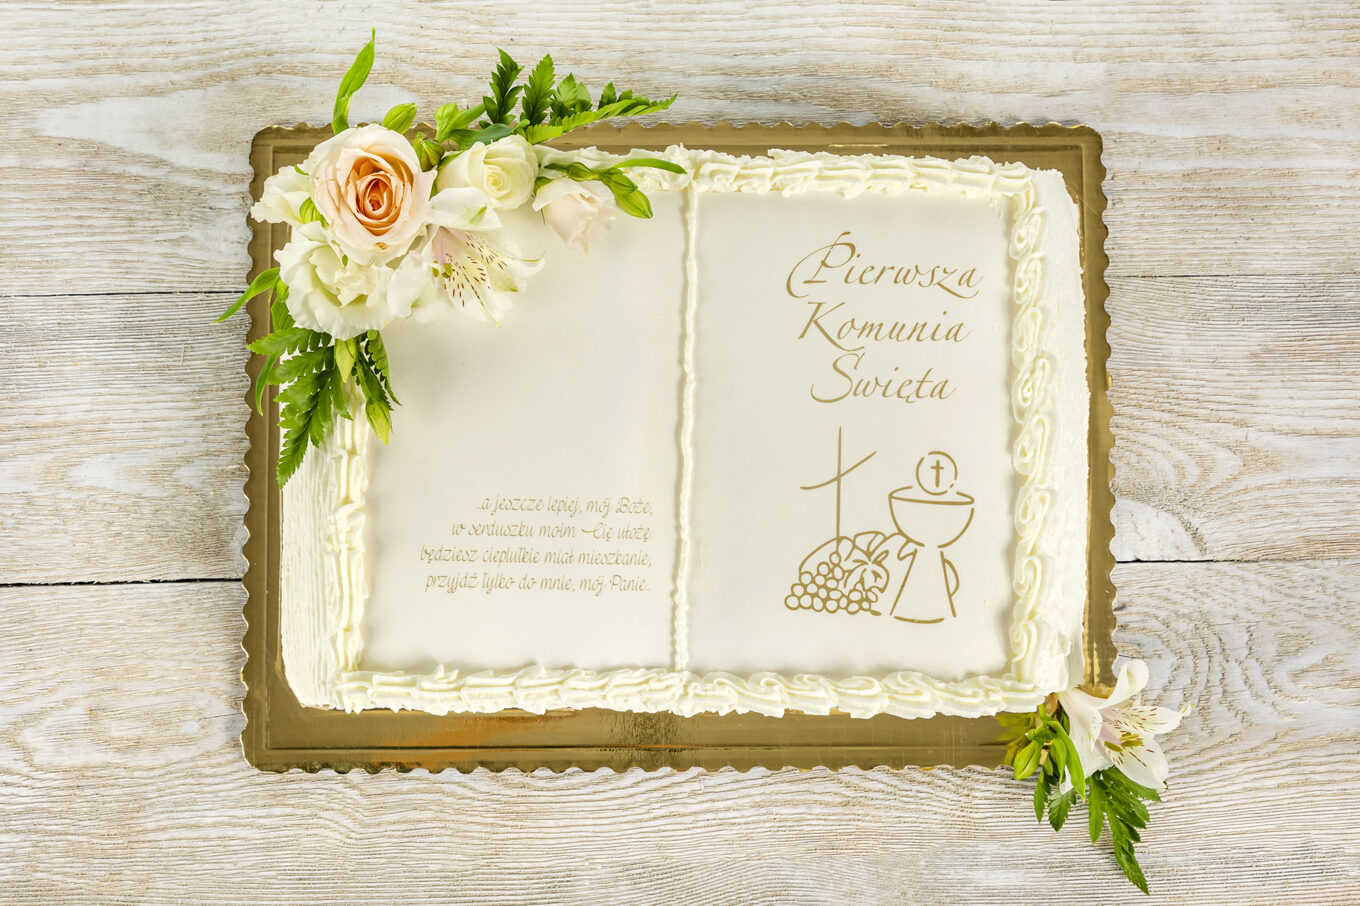 Cake book flowers for communion Cukiernia Jacek Placek is synonymous with the taste of homemade cakes made of natural products.